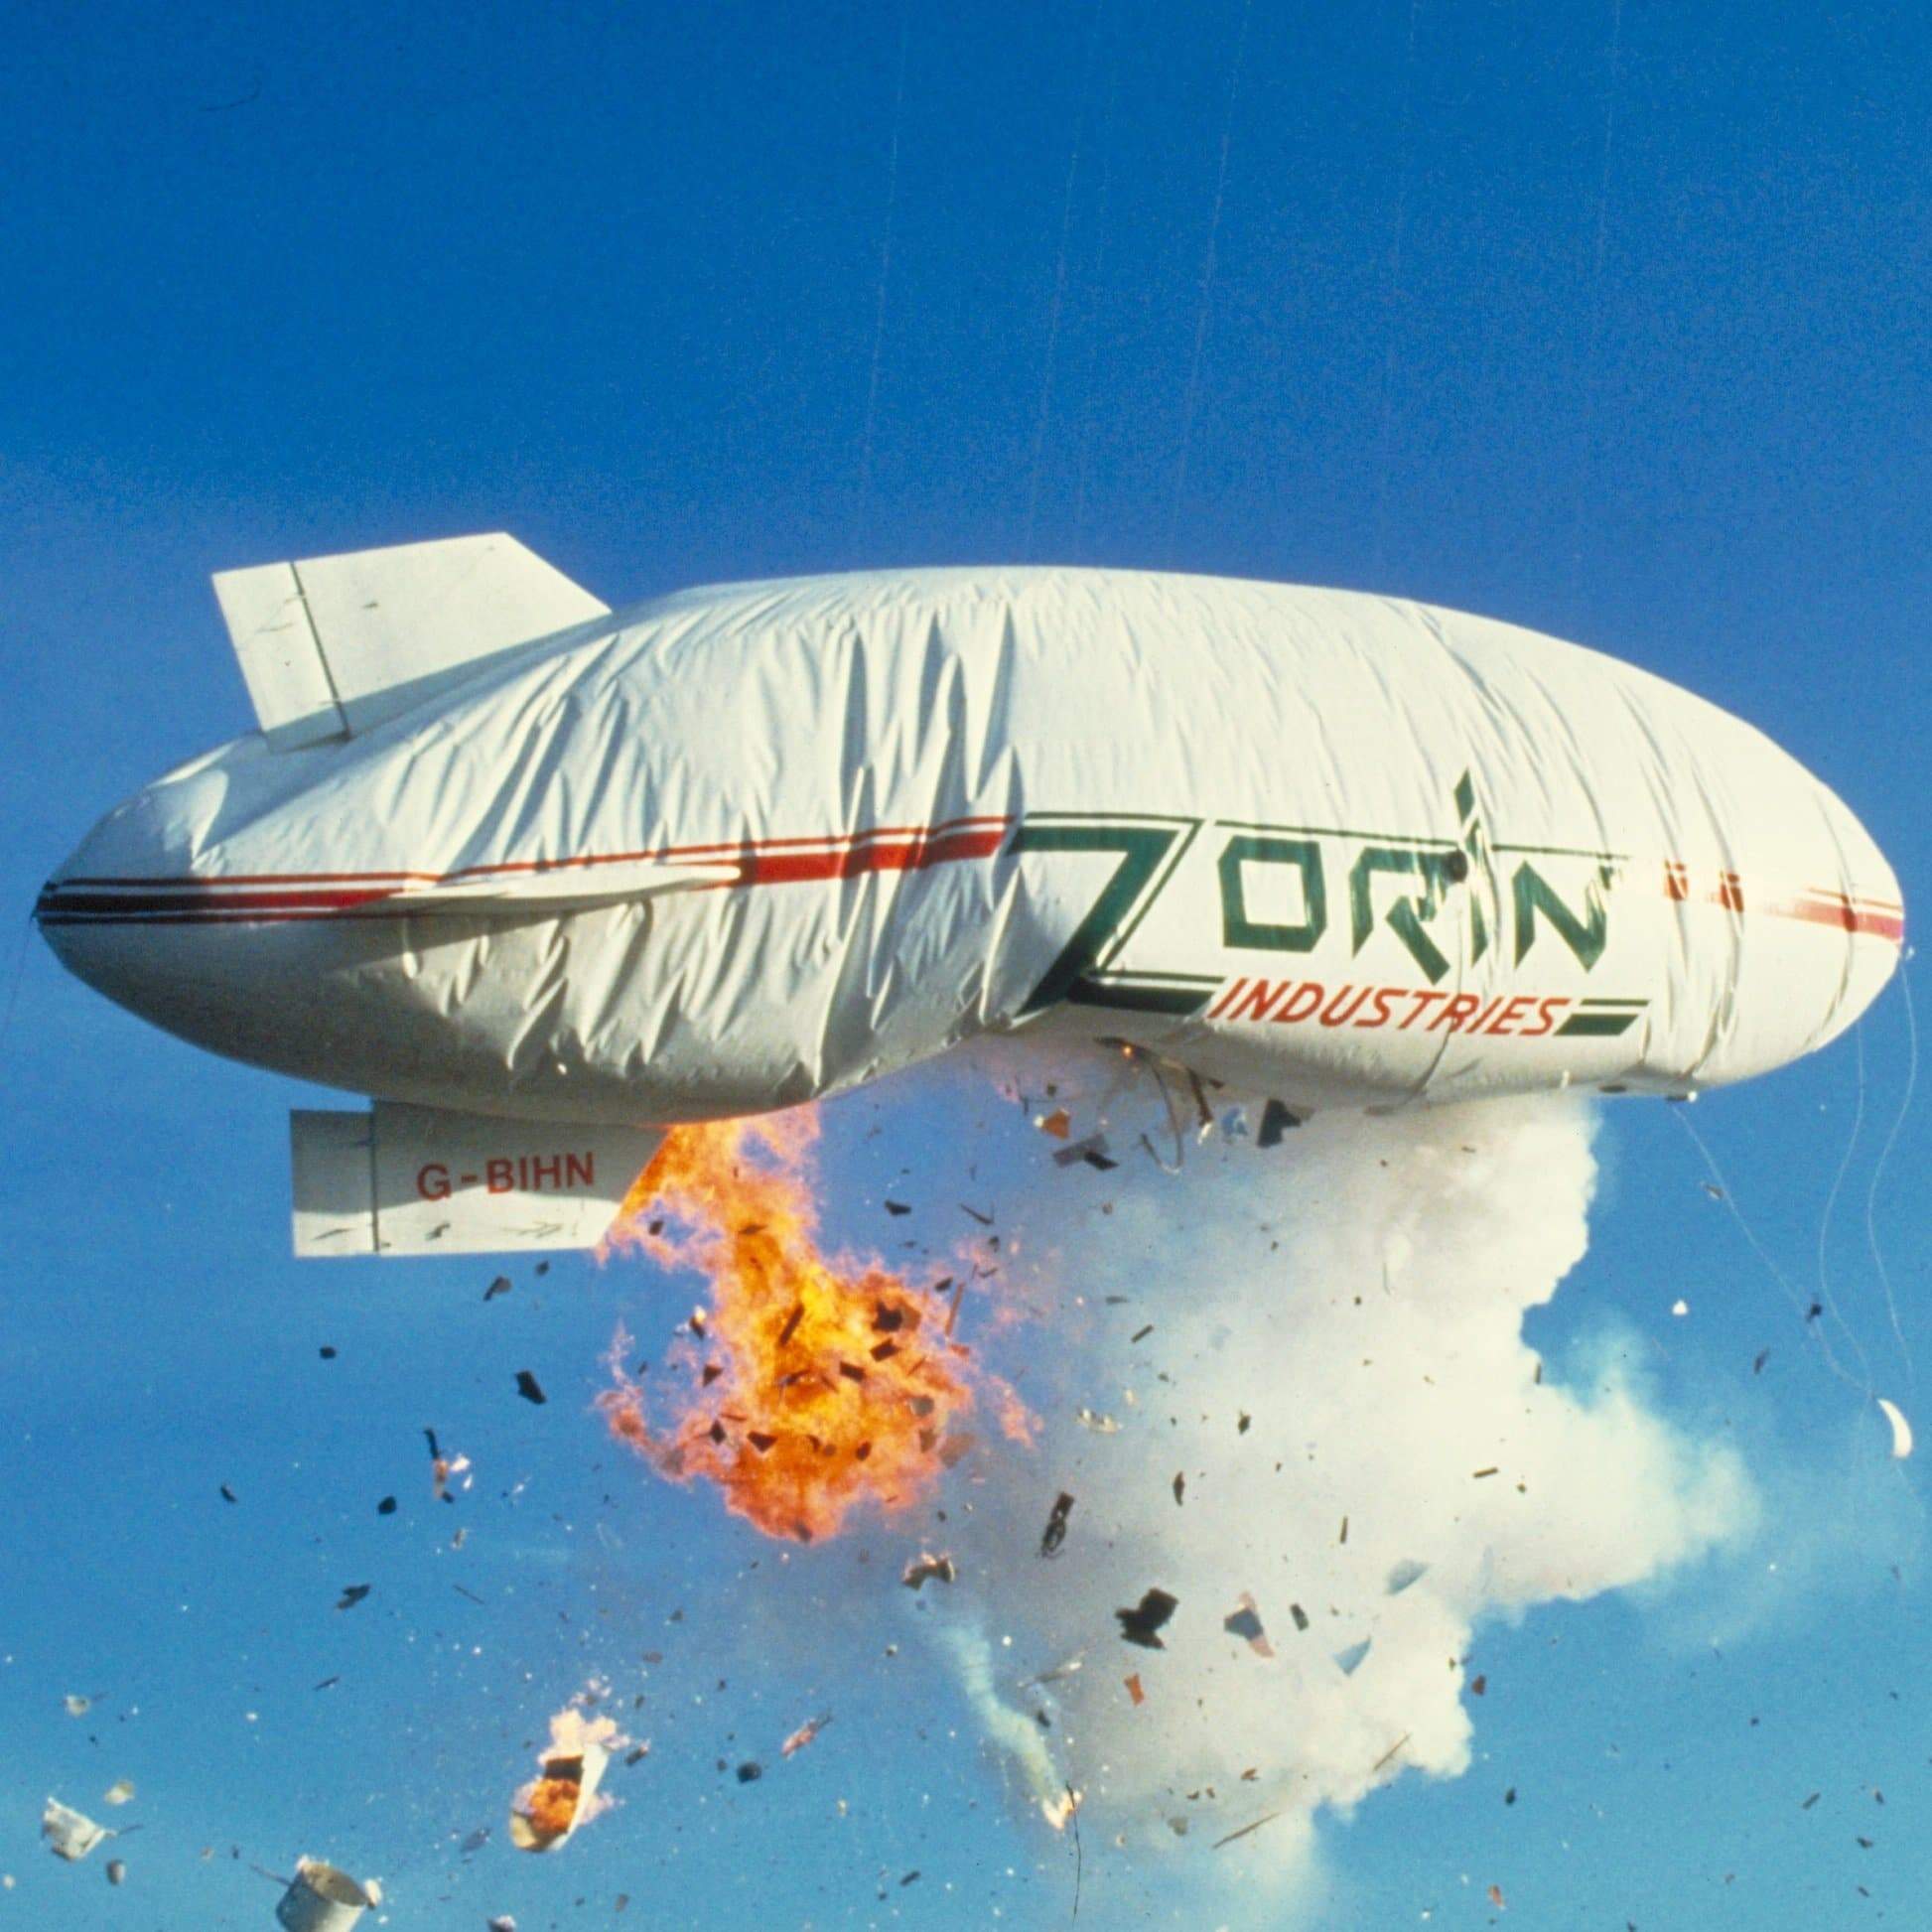 White Zorin Industries Blimp T-Shirt - A View To A Kill Edition